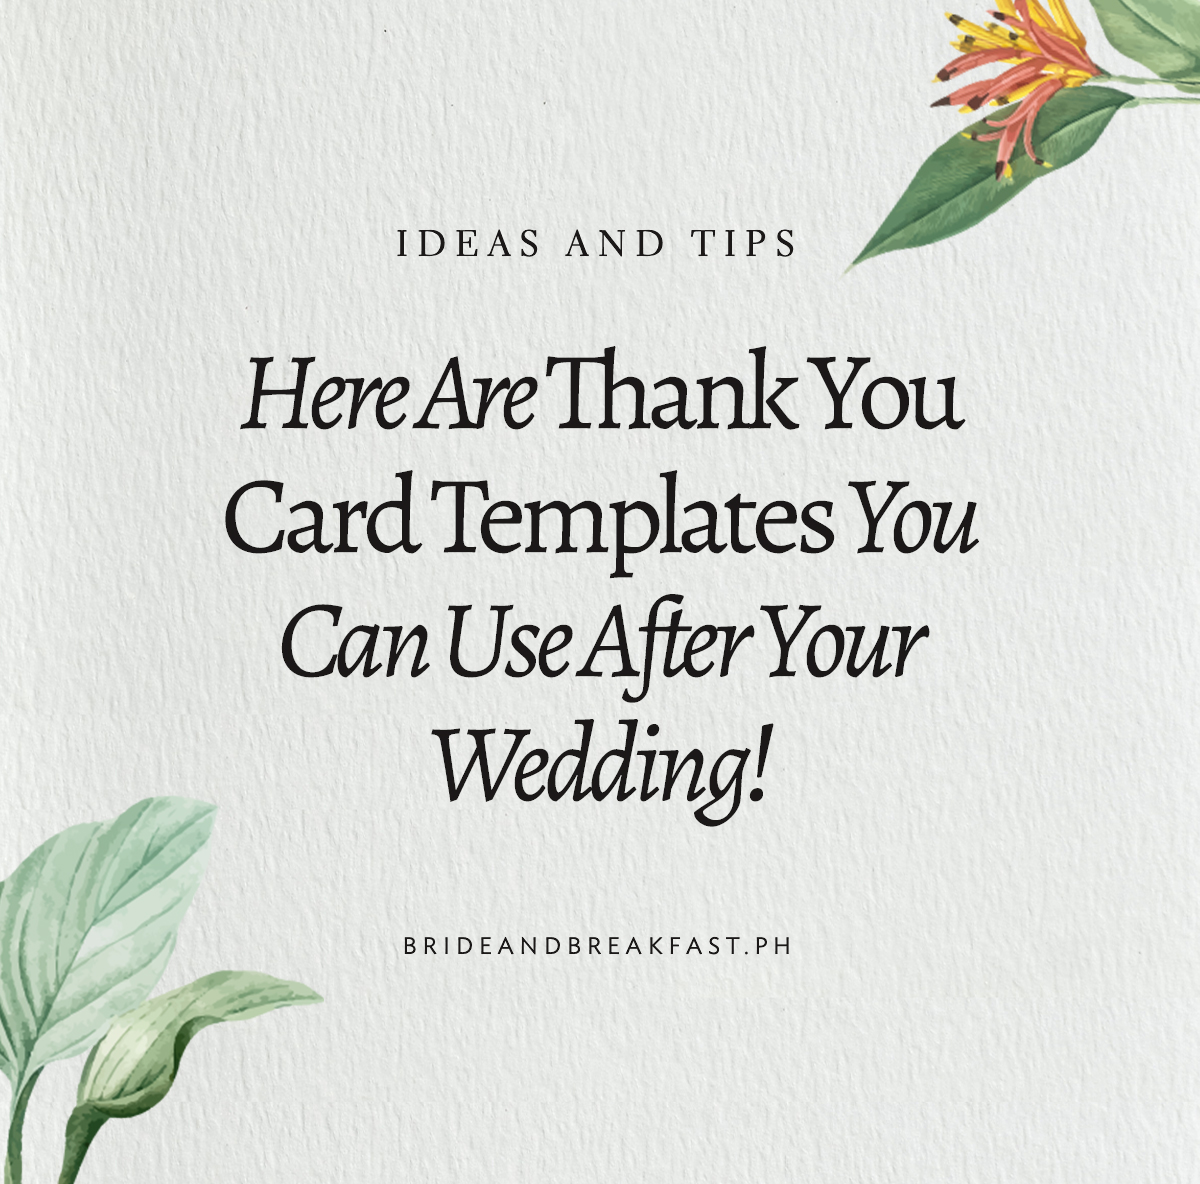 Here Are Thank You Card Templates You Can Use After Your Wedding!